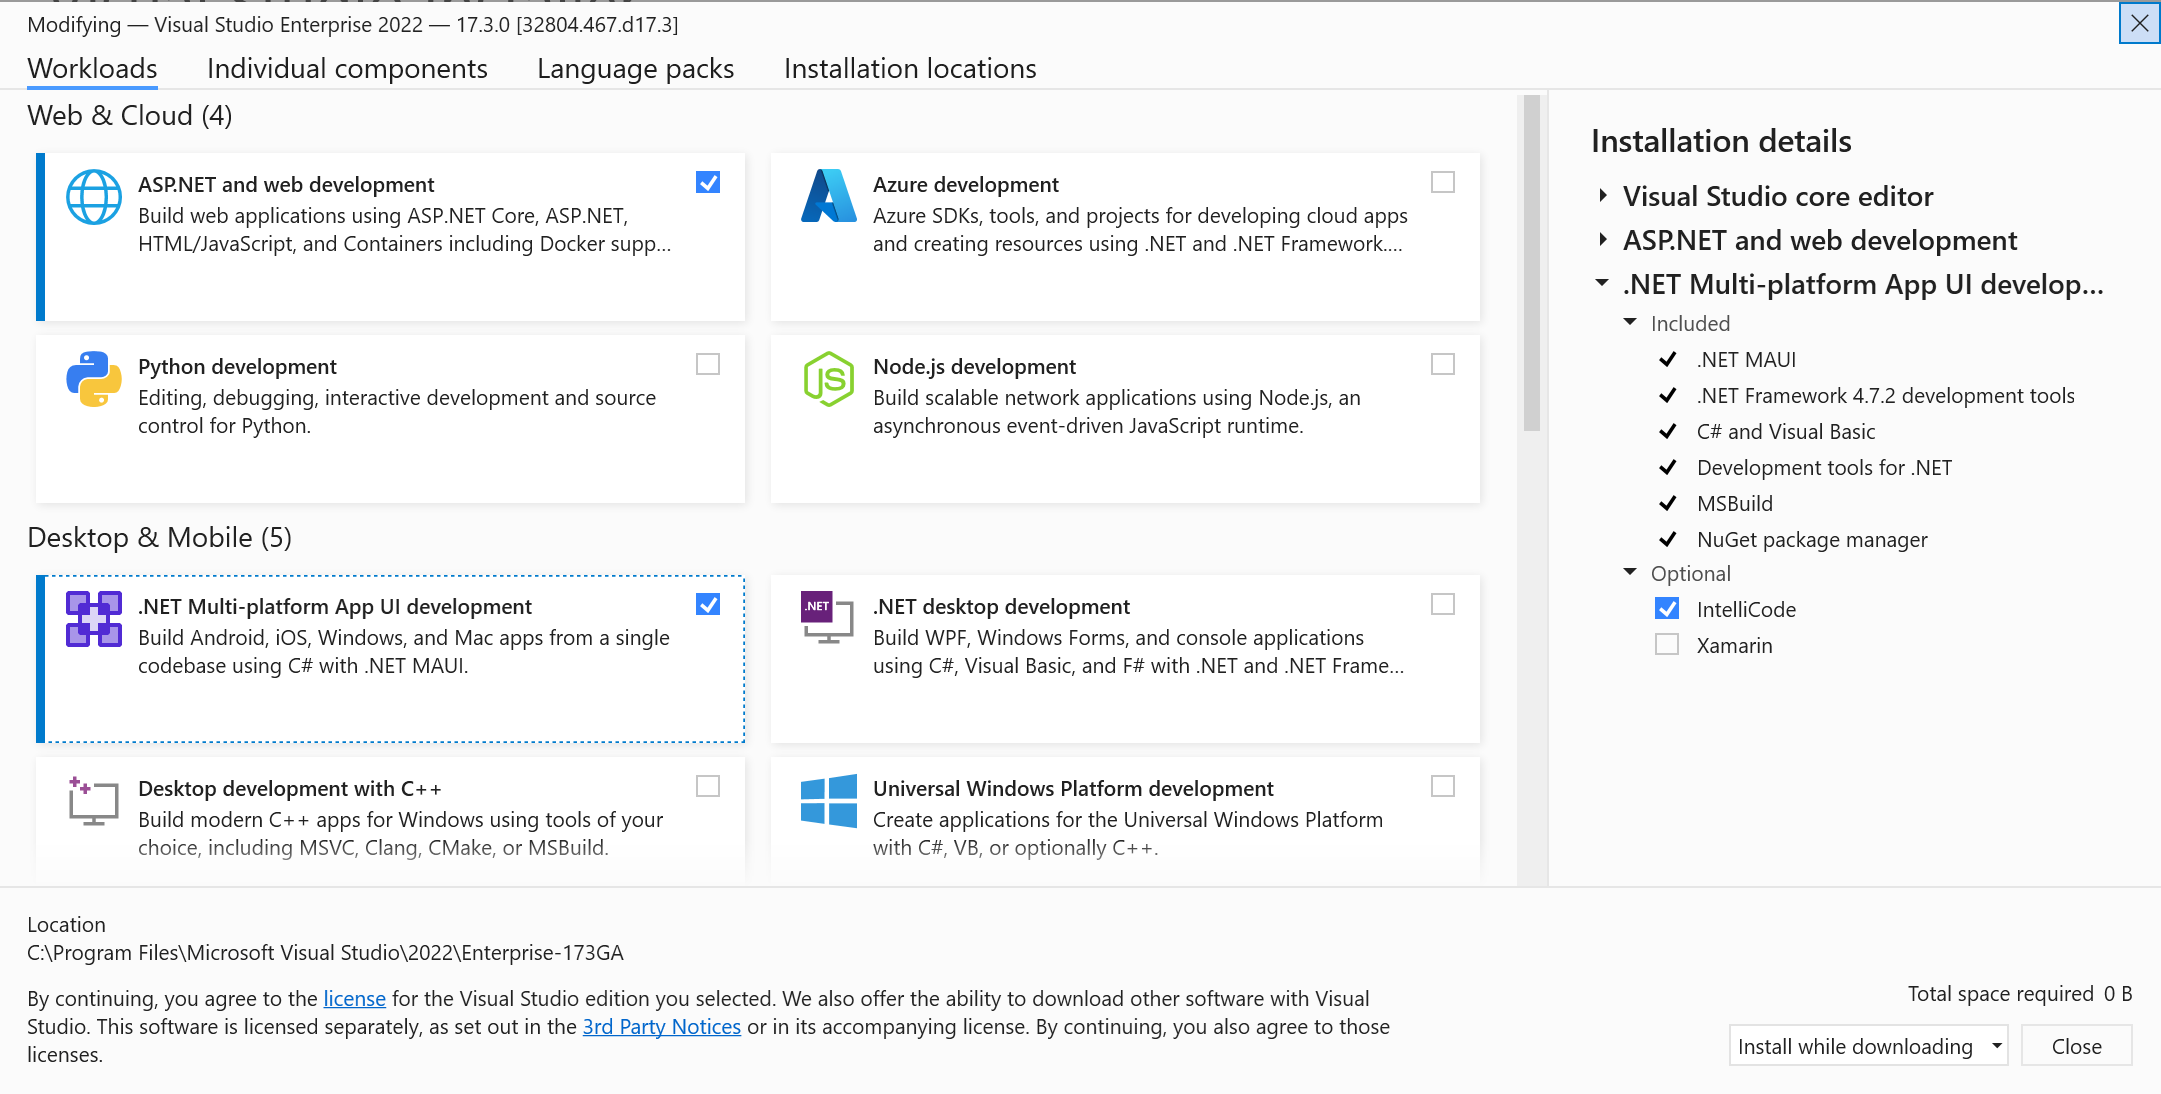 Visual Studio 2022 17.3 is now available and delivers spectacular productivity features for .NET Multi-platform App UI (.NET MAUI).